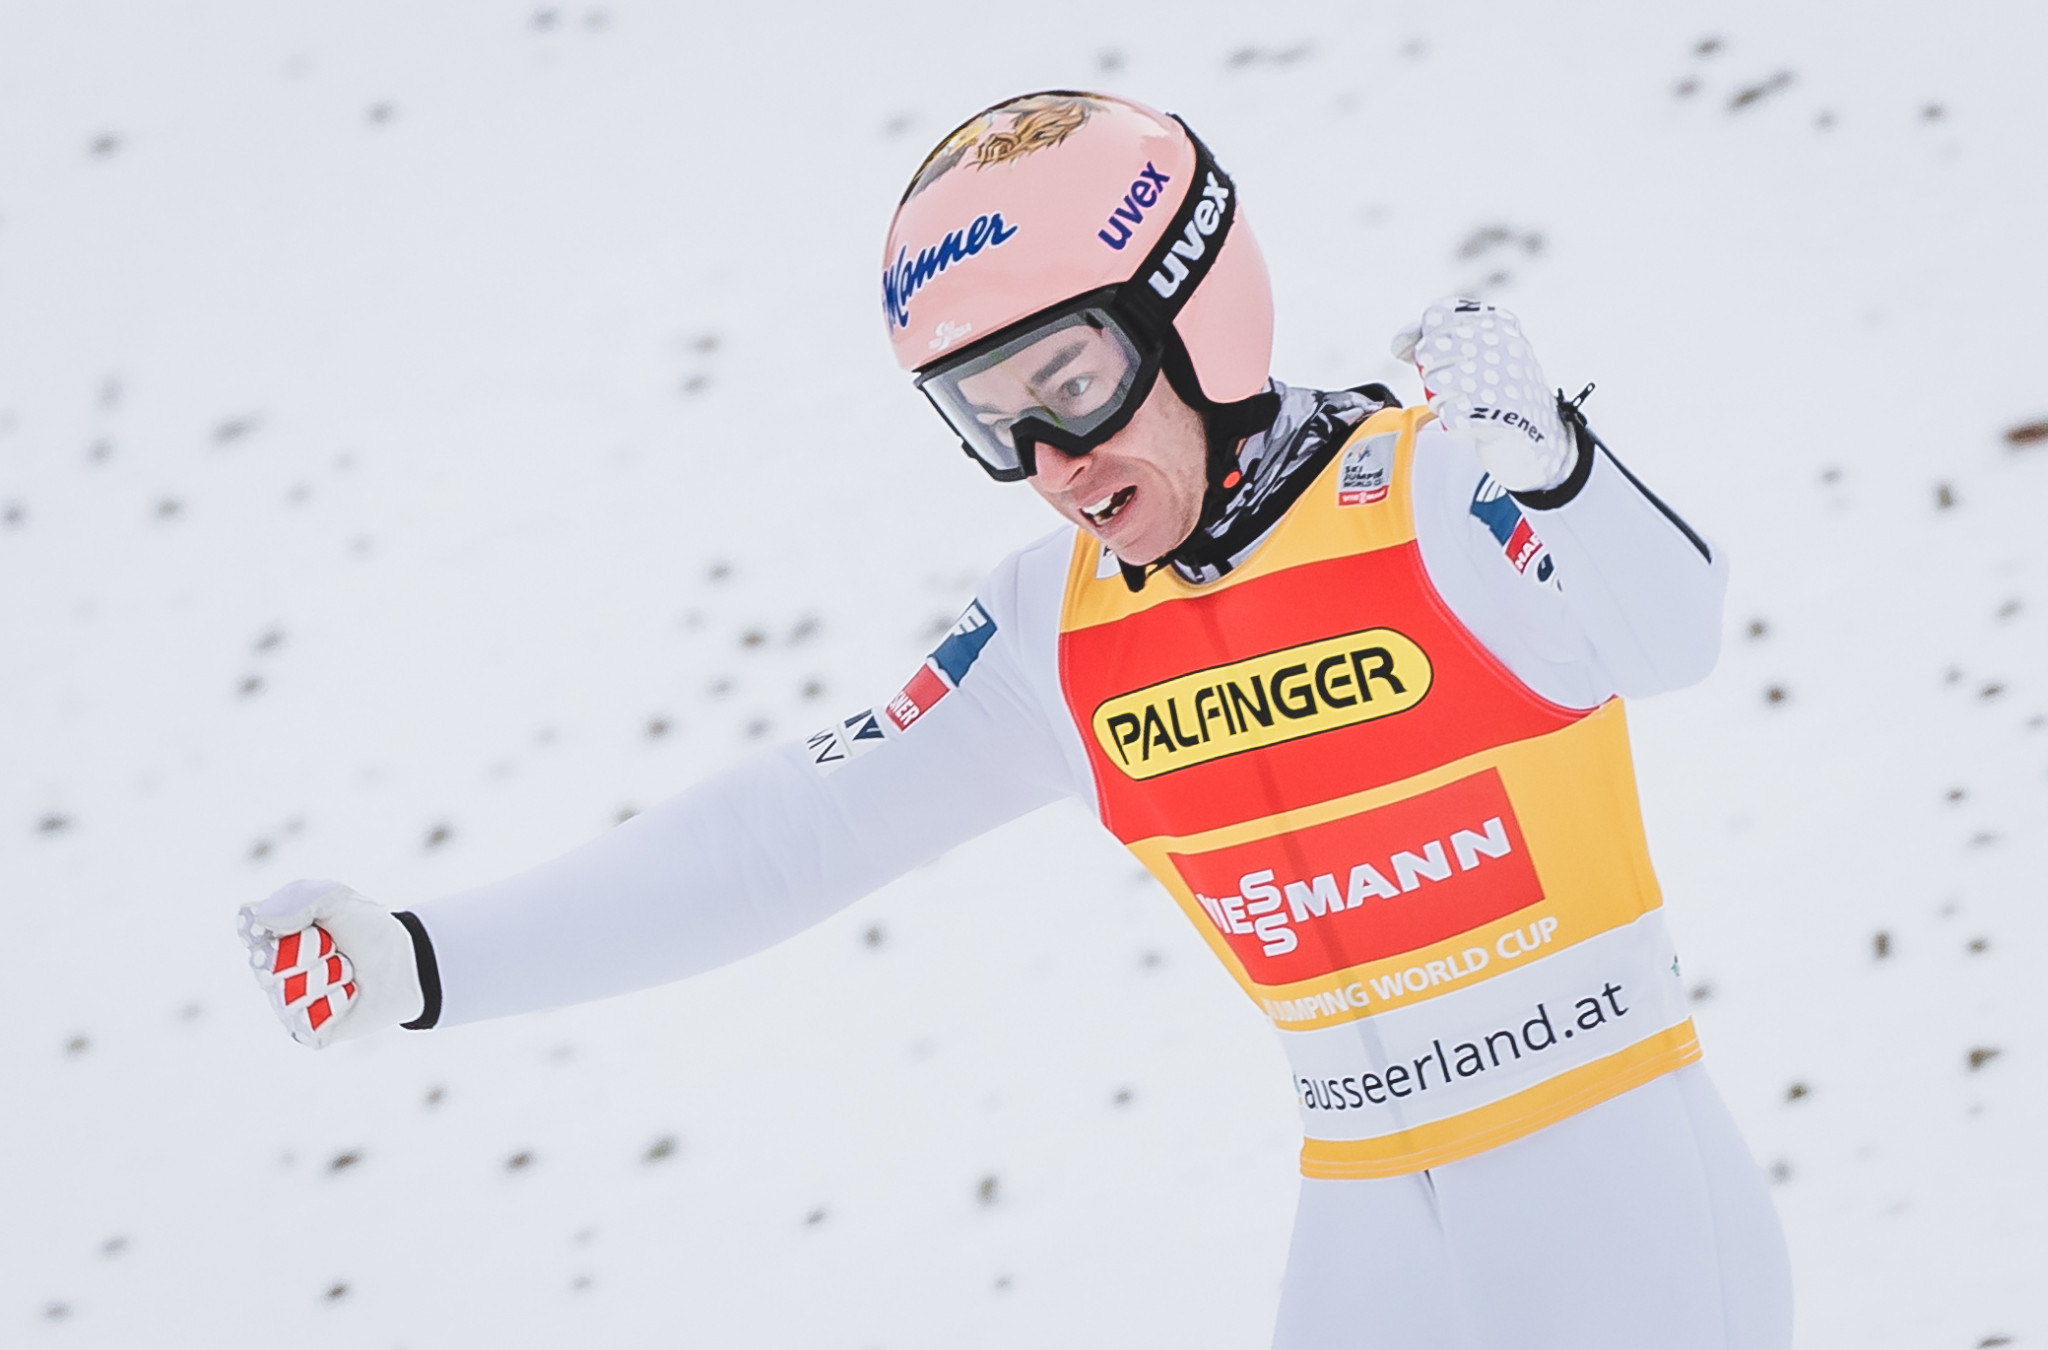 Home hero Kraft extends FIS Ski Jumping World Cup lead with win in Austria